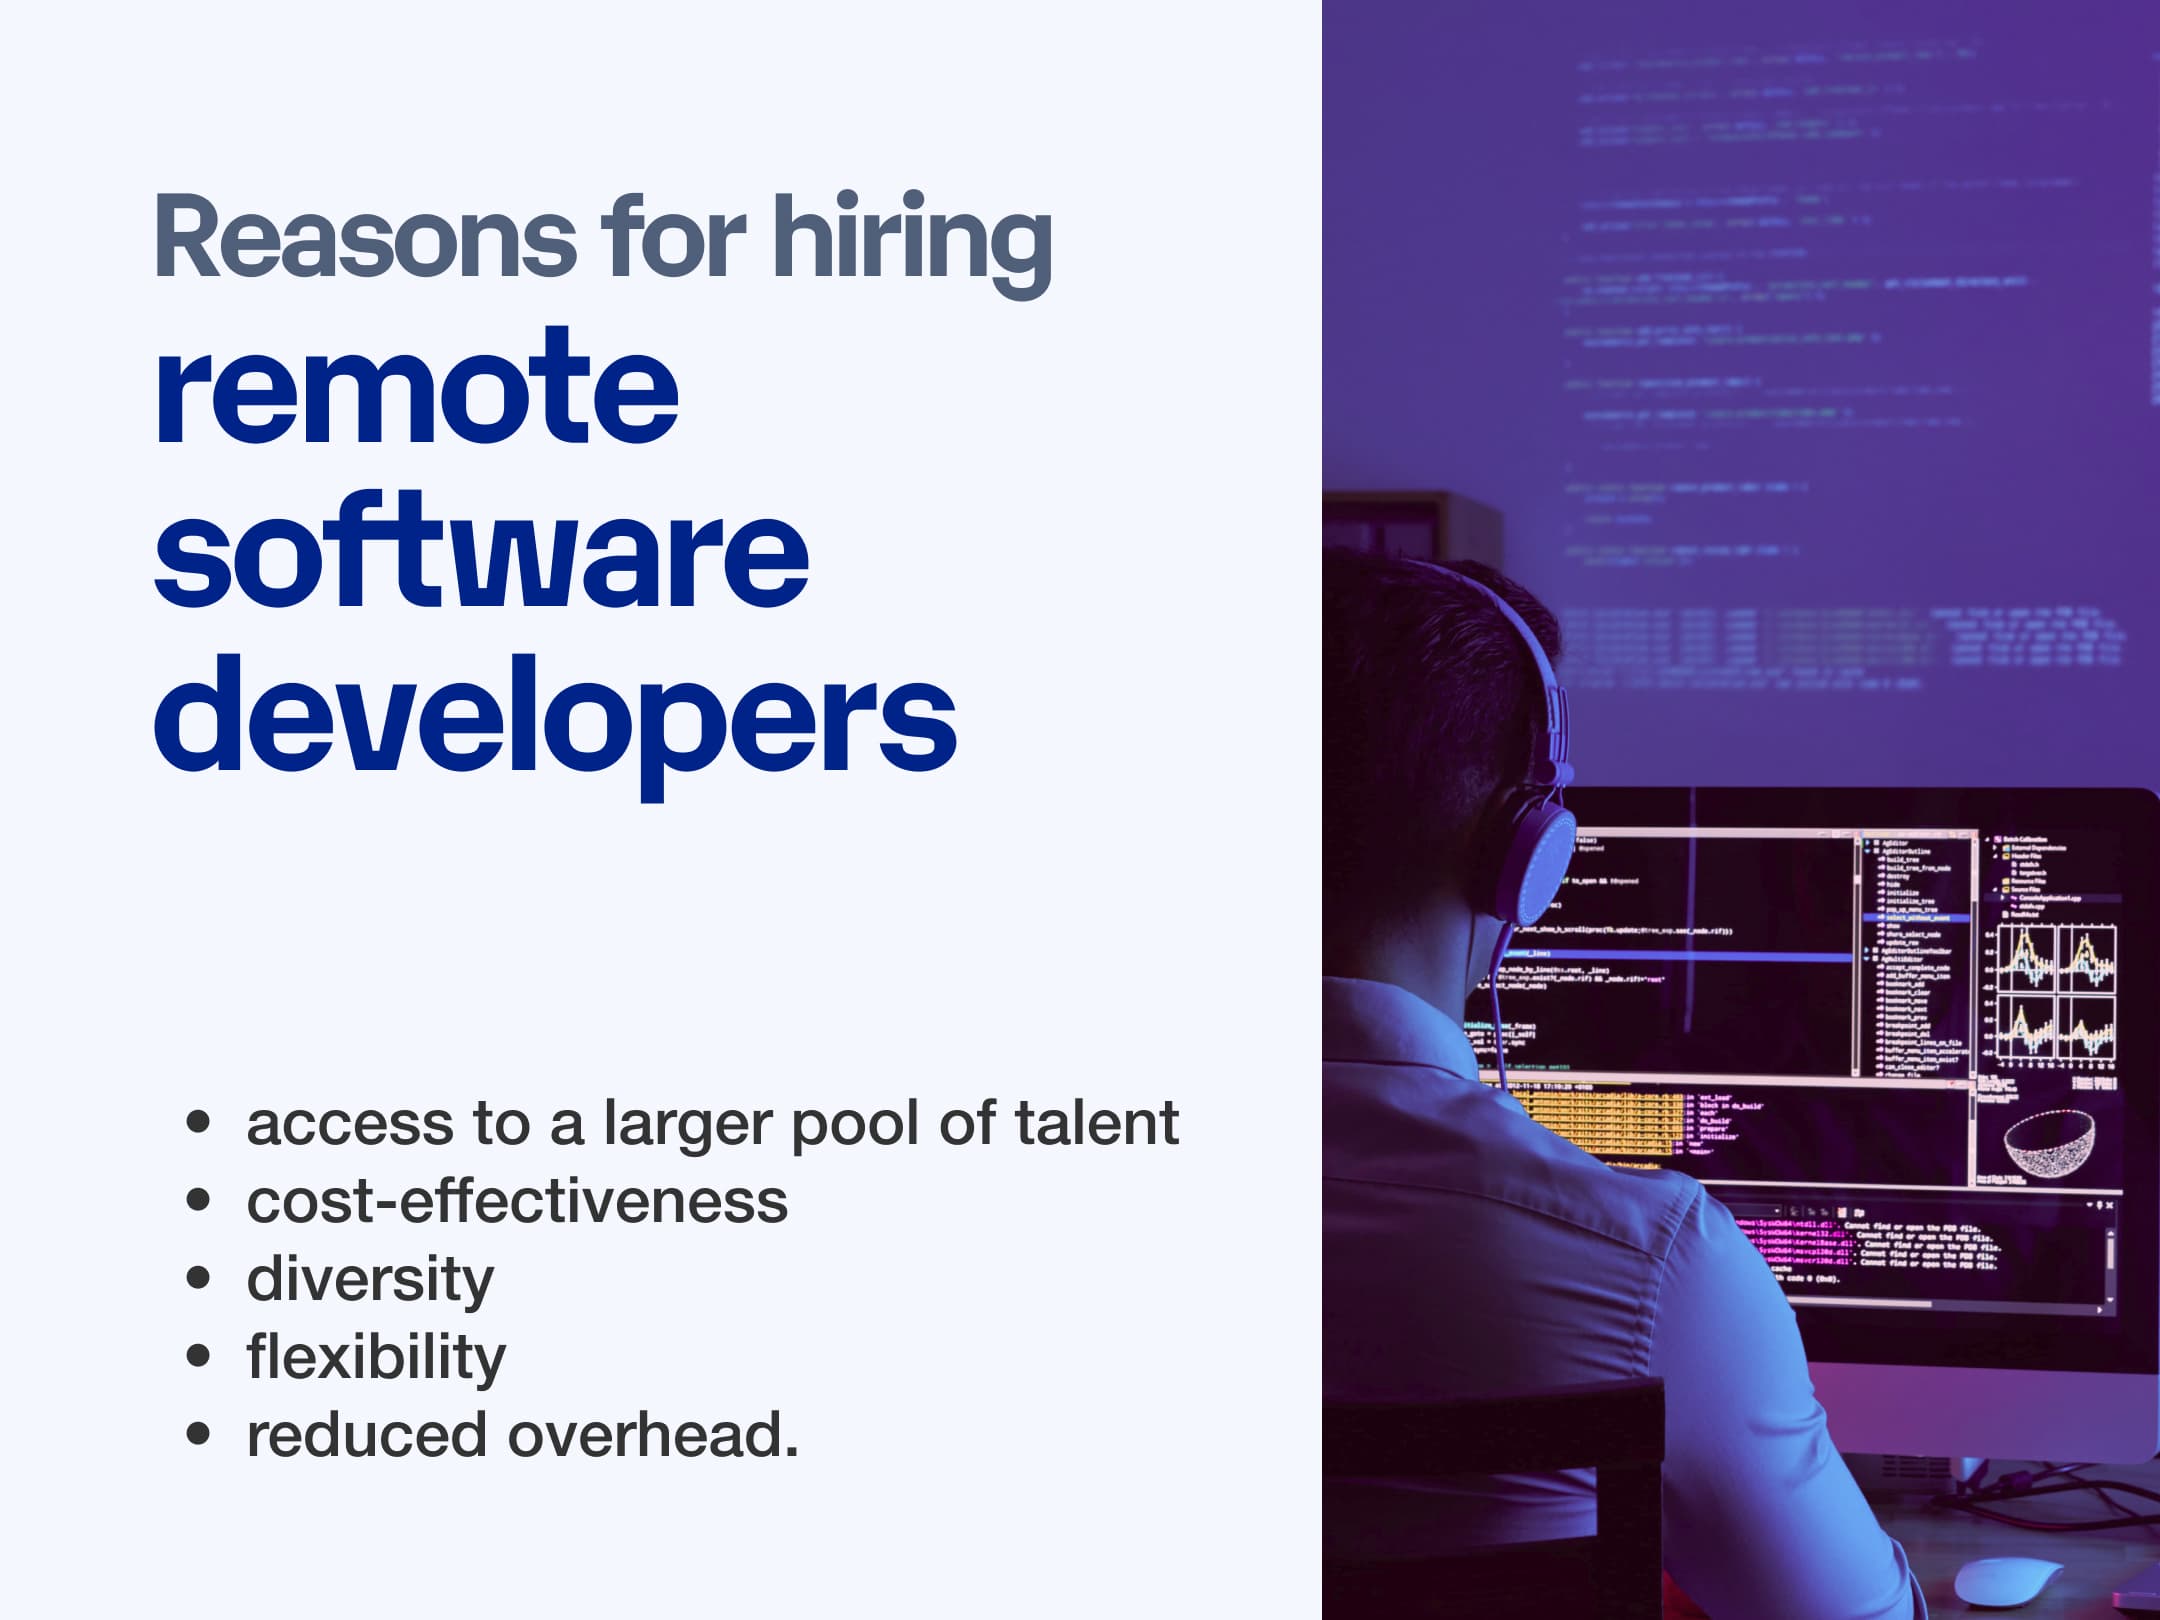 Reasons for Hiring Remote Software Developers